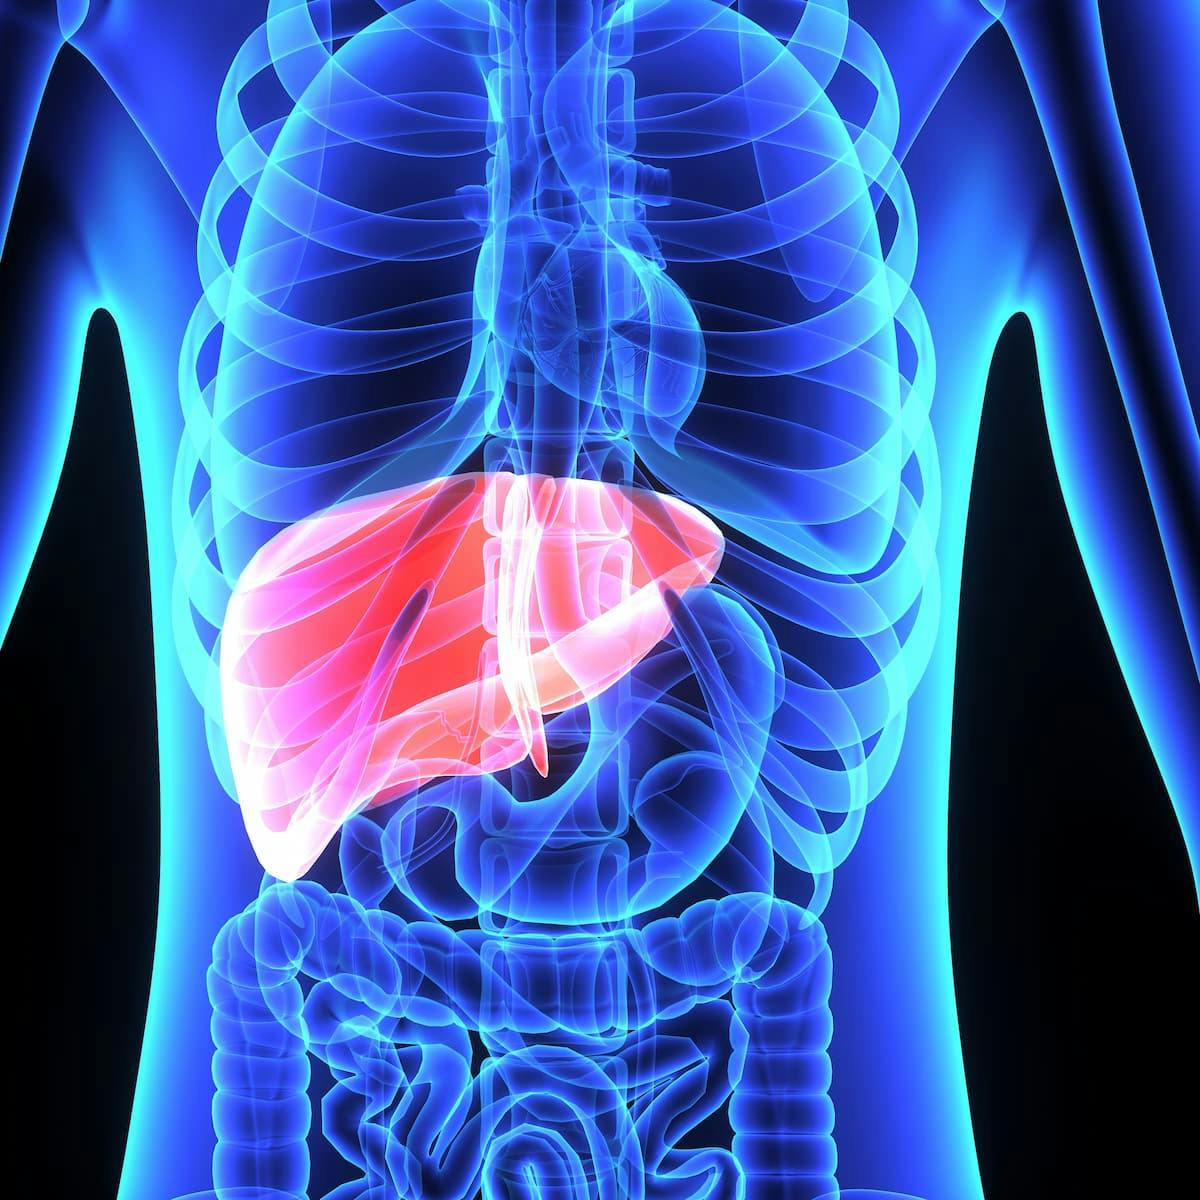 IMbrave50 is "the first phase 3 study to show that a cancer immunotherapy combination reduced the risk of disease returning in people" with early-stage hepatocellular carcinoma, according to an expert from Genentech.